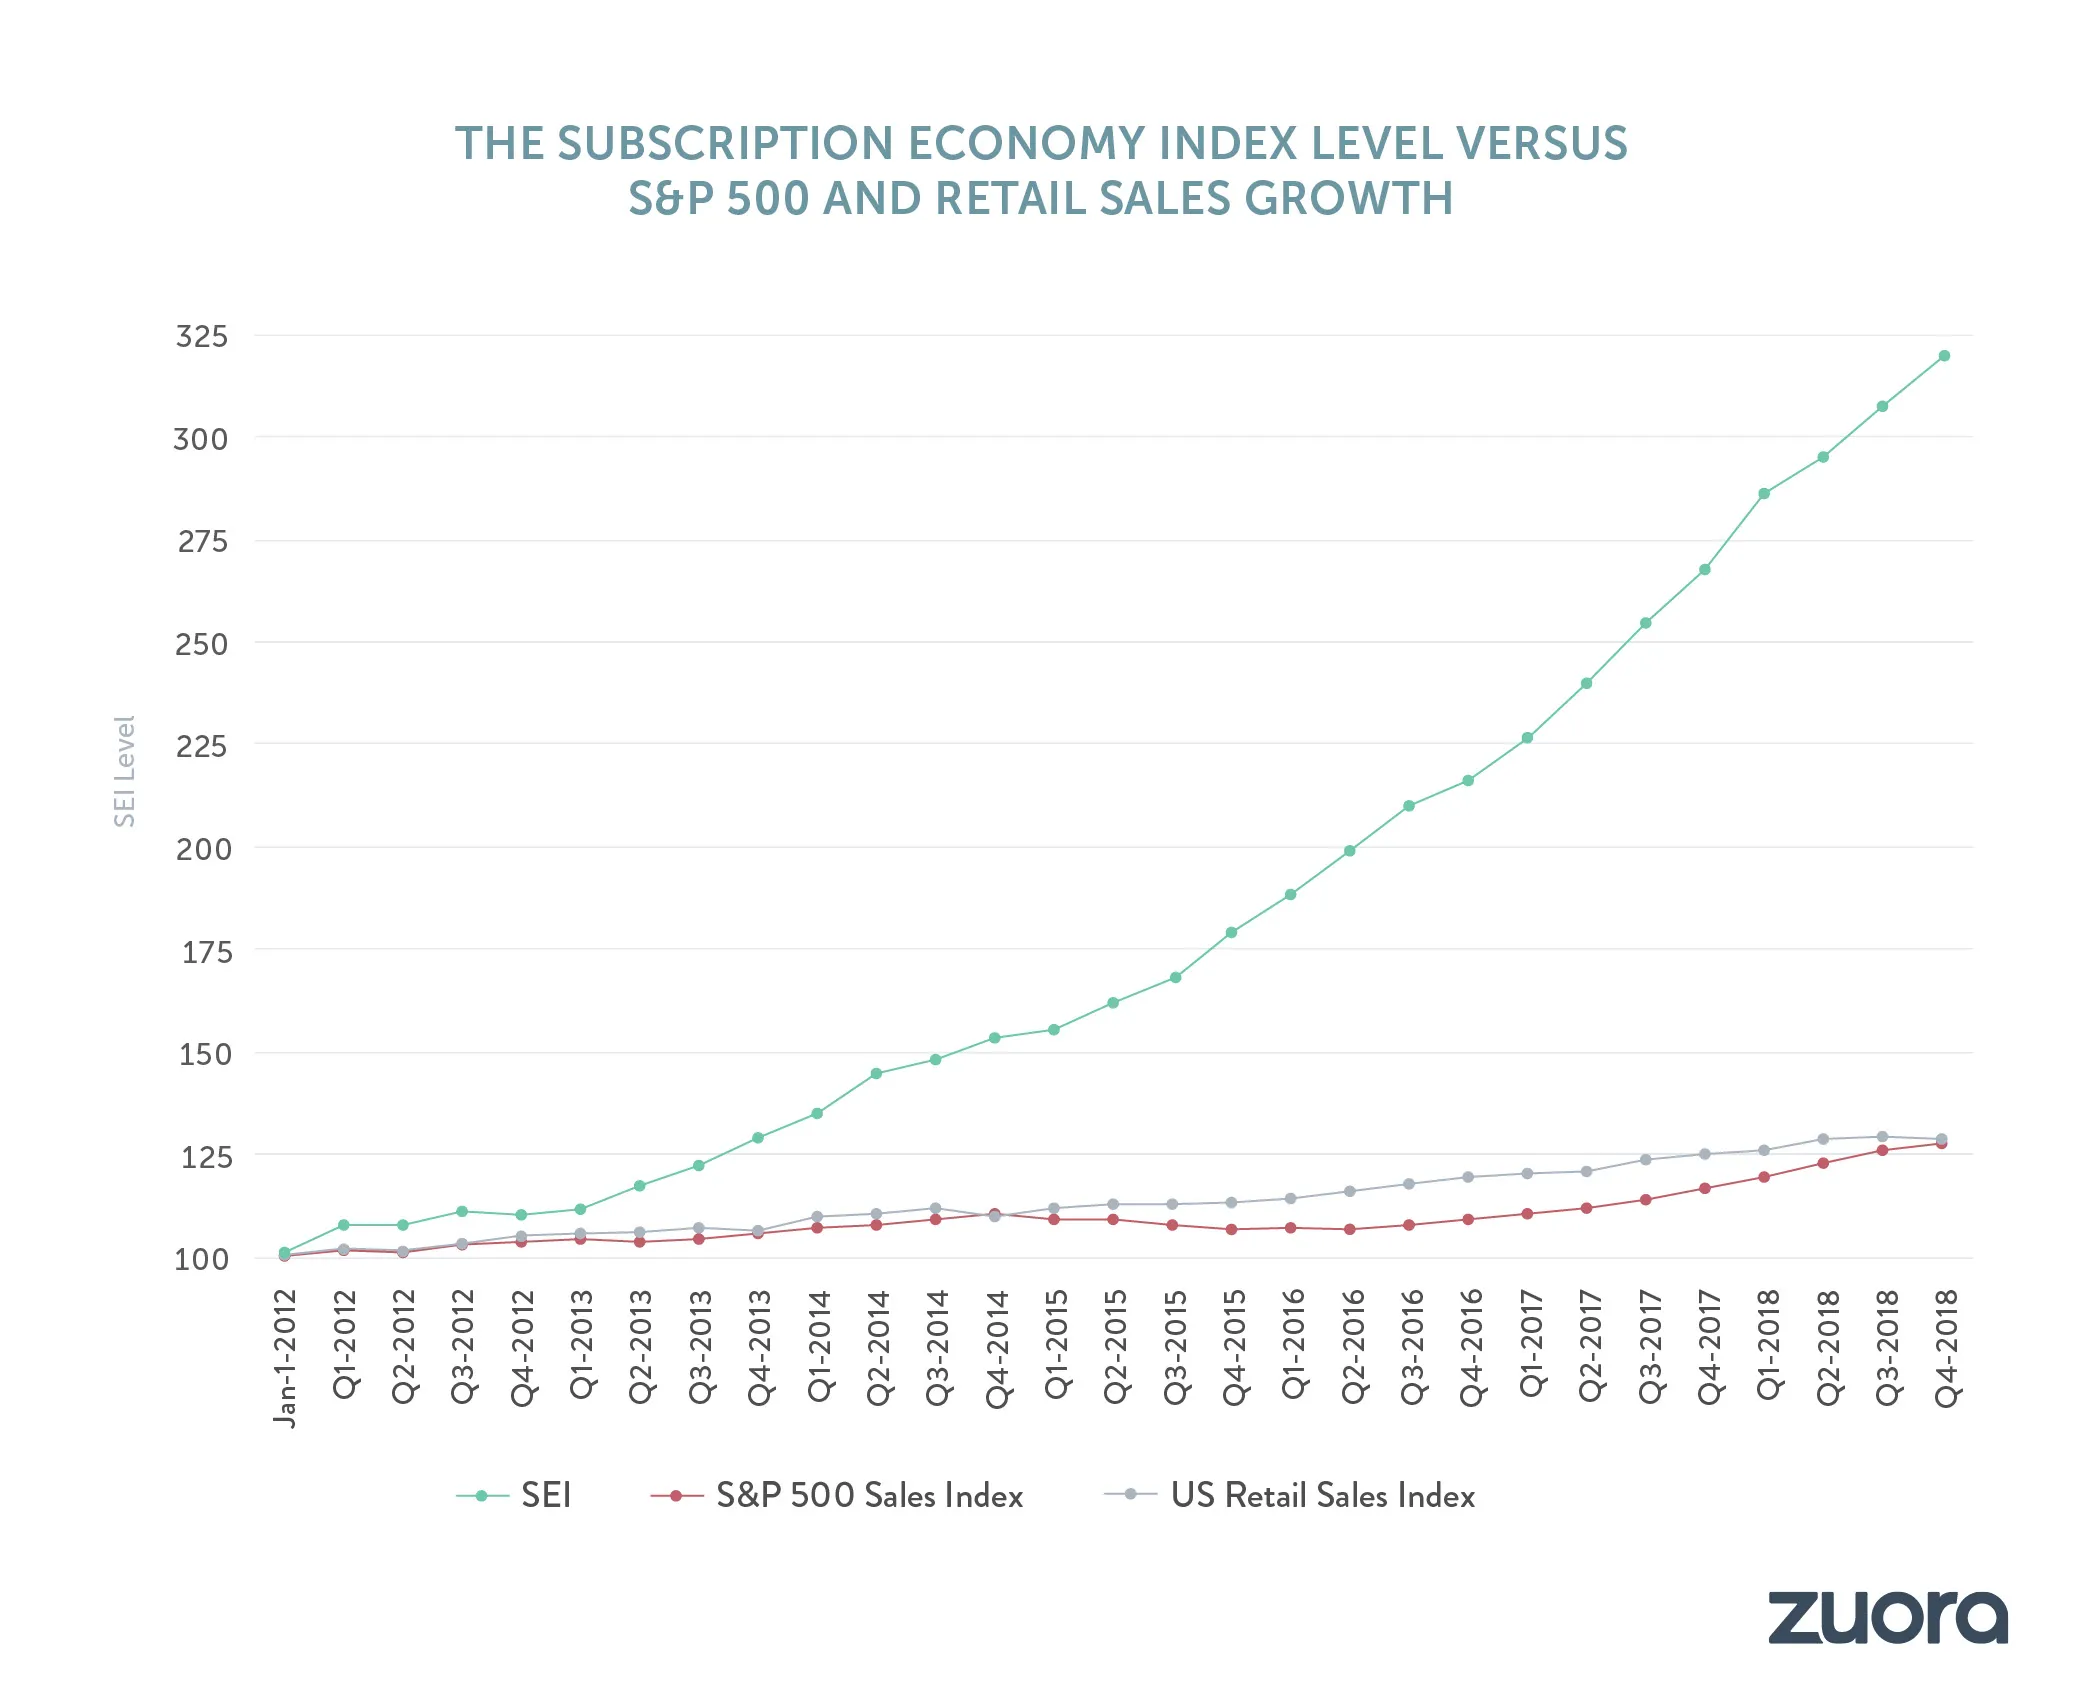 Chart comparing Subscription economy index versus S&P 500 and US retail